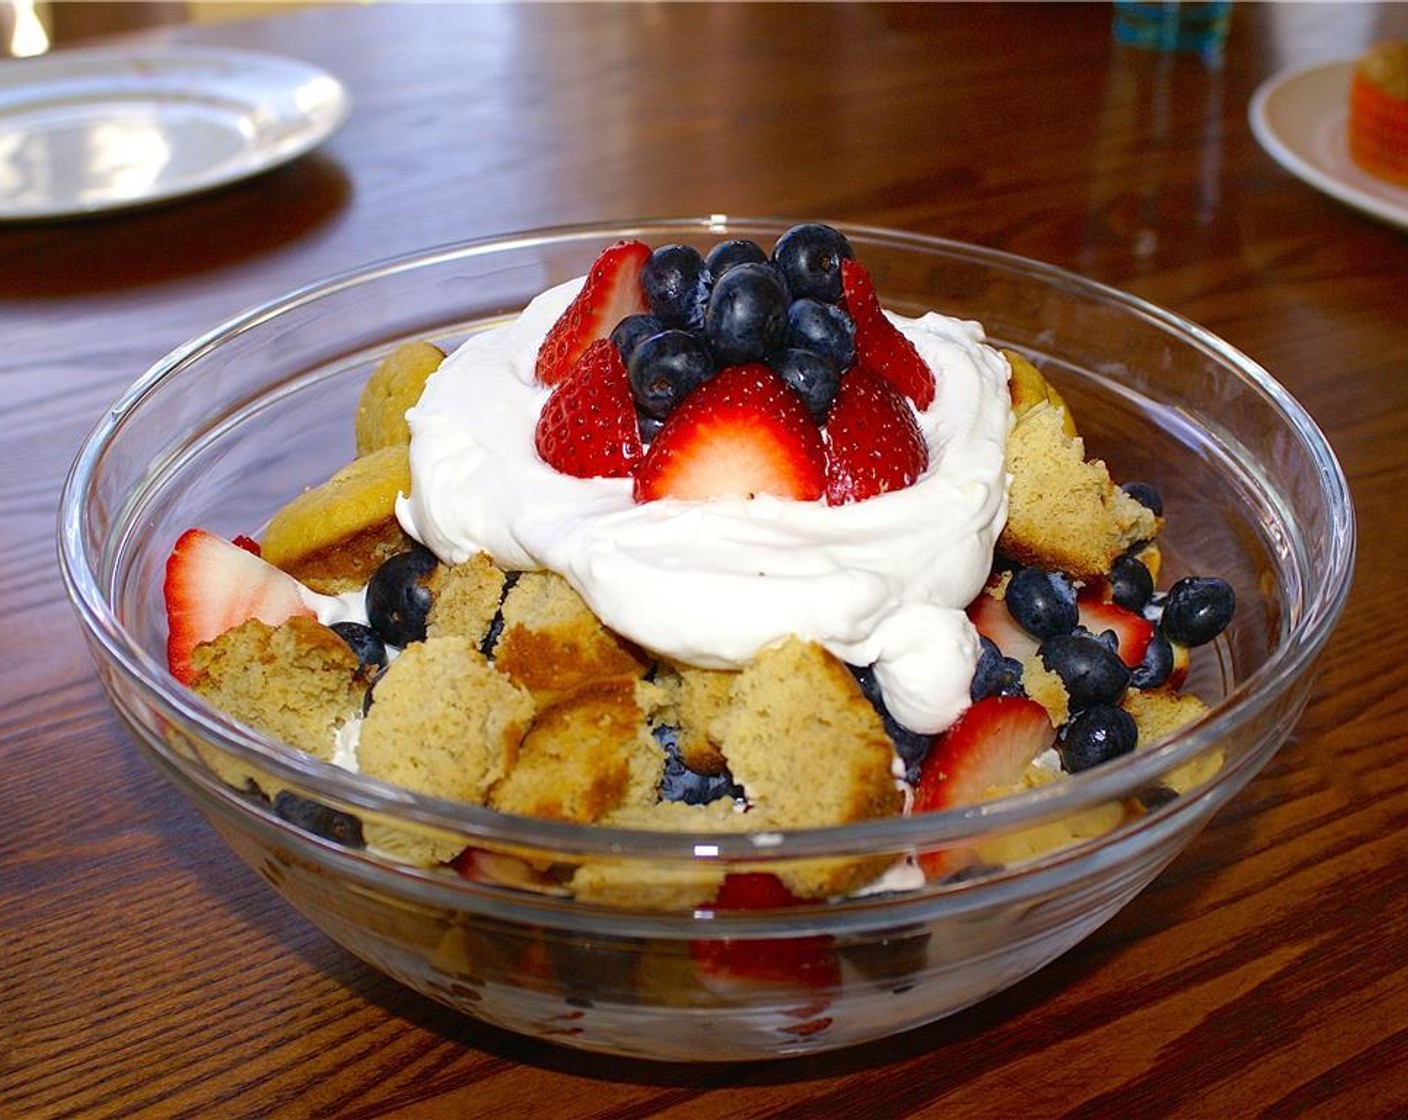 step 8 Top with the rest of the cream and Fresh Mixed Berries (2 cups). Serve and enjoy!